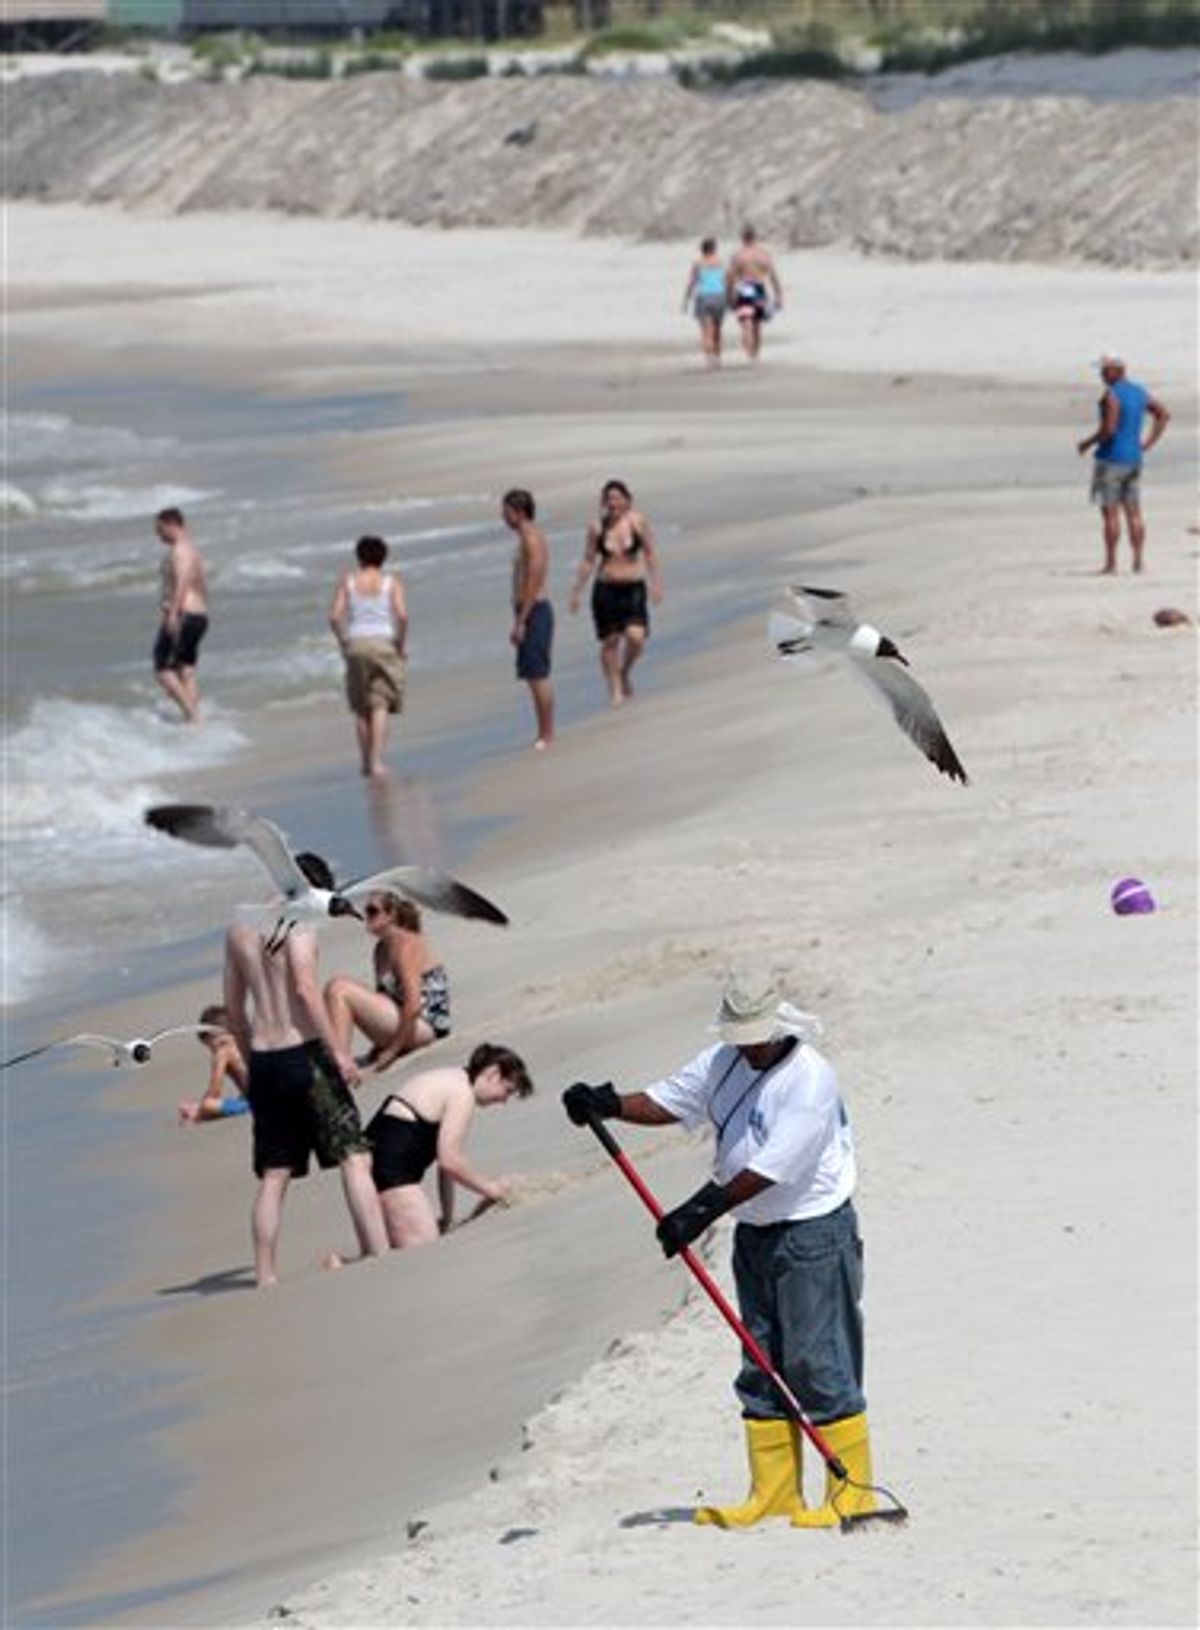 An oil cleanup worker rakes the sand along the beach in Dauphin Island, Ala., on Sunday, July 4, 2010. Workers nearly outnumbered tourists on the beach. Oil from the Deepwater Horizon disaster continues to wash ashore along the Alabama and Florida coasts. (AP Photo/Dave Martin) (AP)